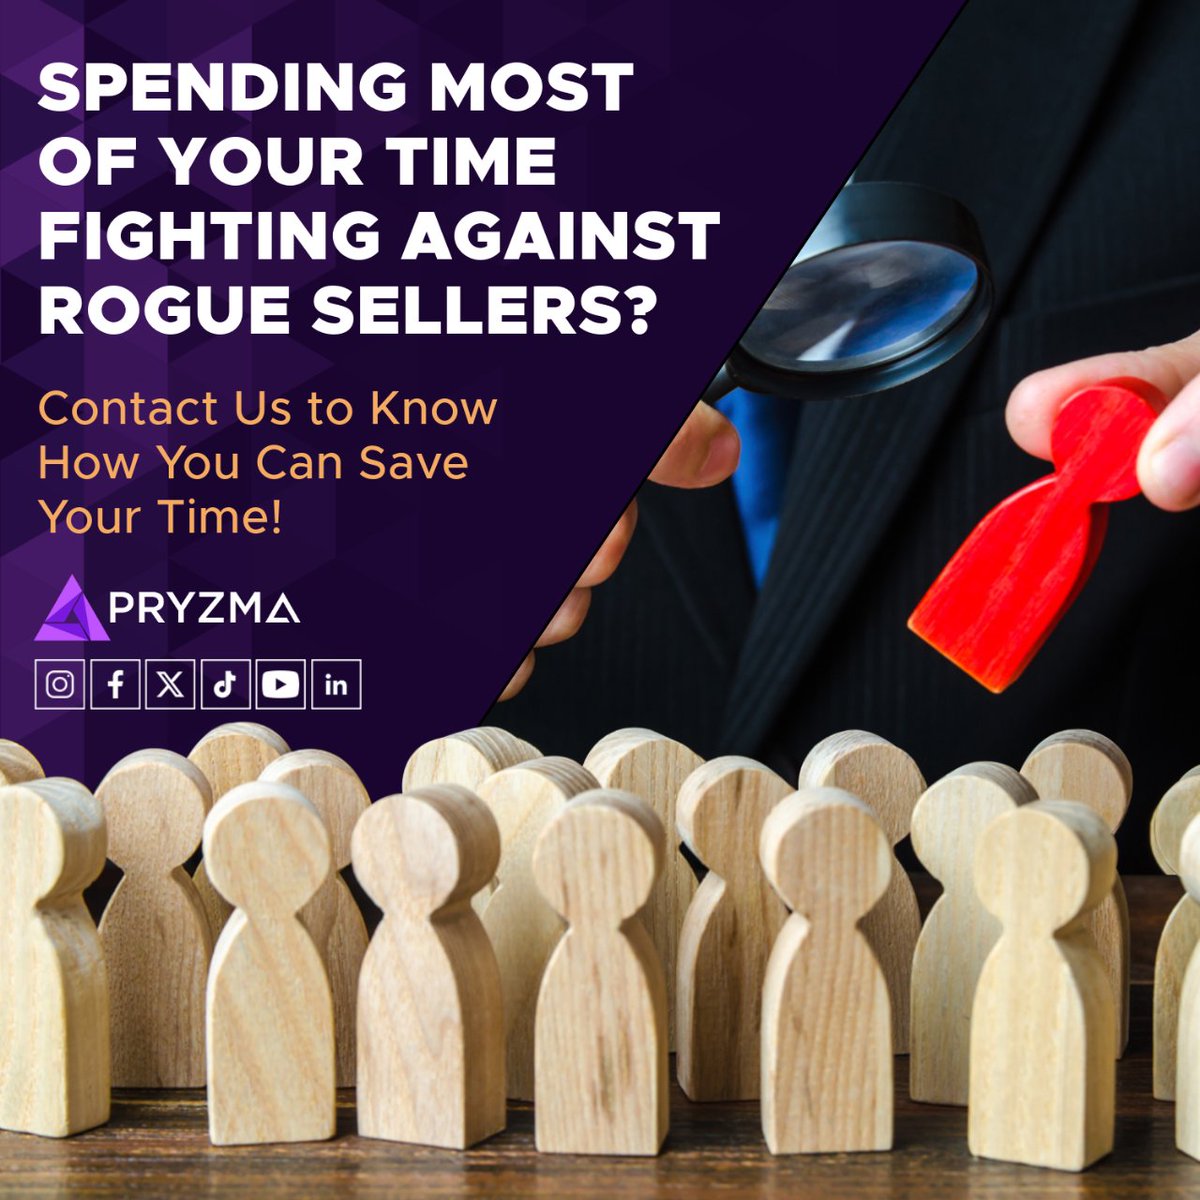 Struggling with rogue sellers?  

Pryzma has your back! We offer expert solutions to protect your brand and reputation. Let us handle the fight while you focus on growing your business. 

#ecommerce #ecommercebusiness #amazonfba #amazonseller #ebayseller #walmartseller #pryzma